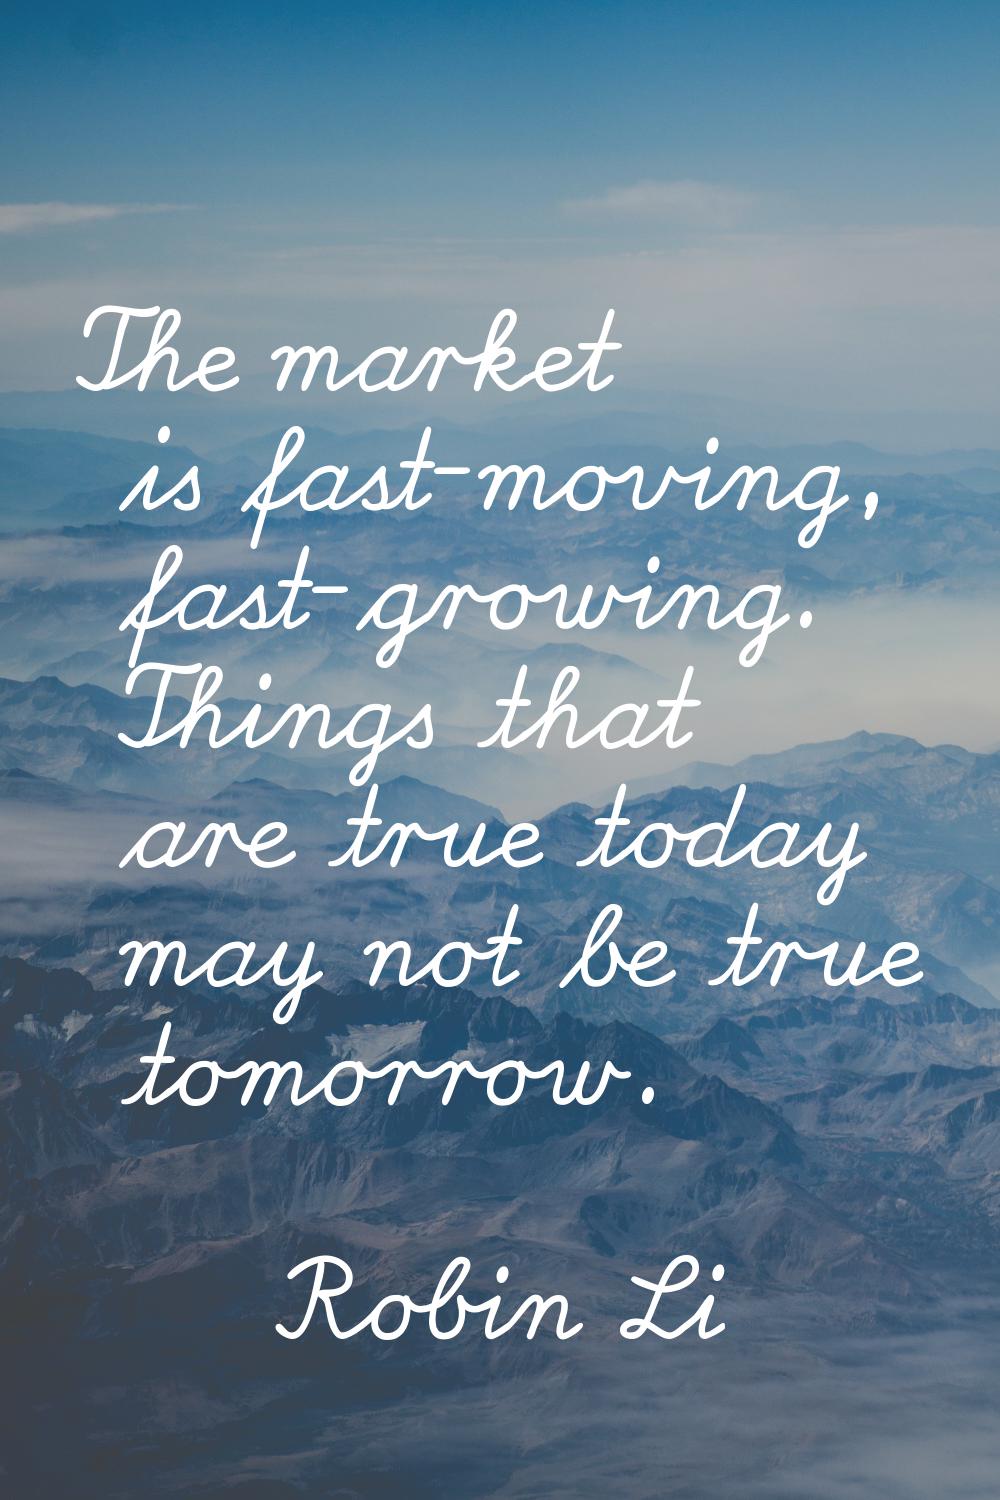 The market is fast-moving, fast-growing. Things that are true today may not be true tomorrow.